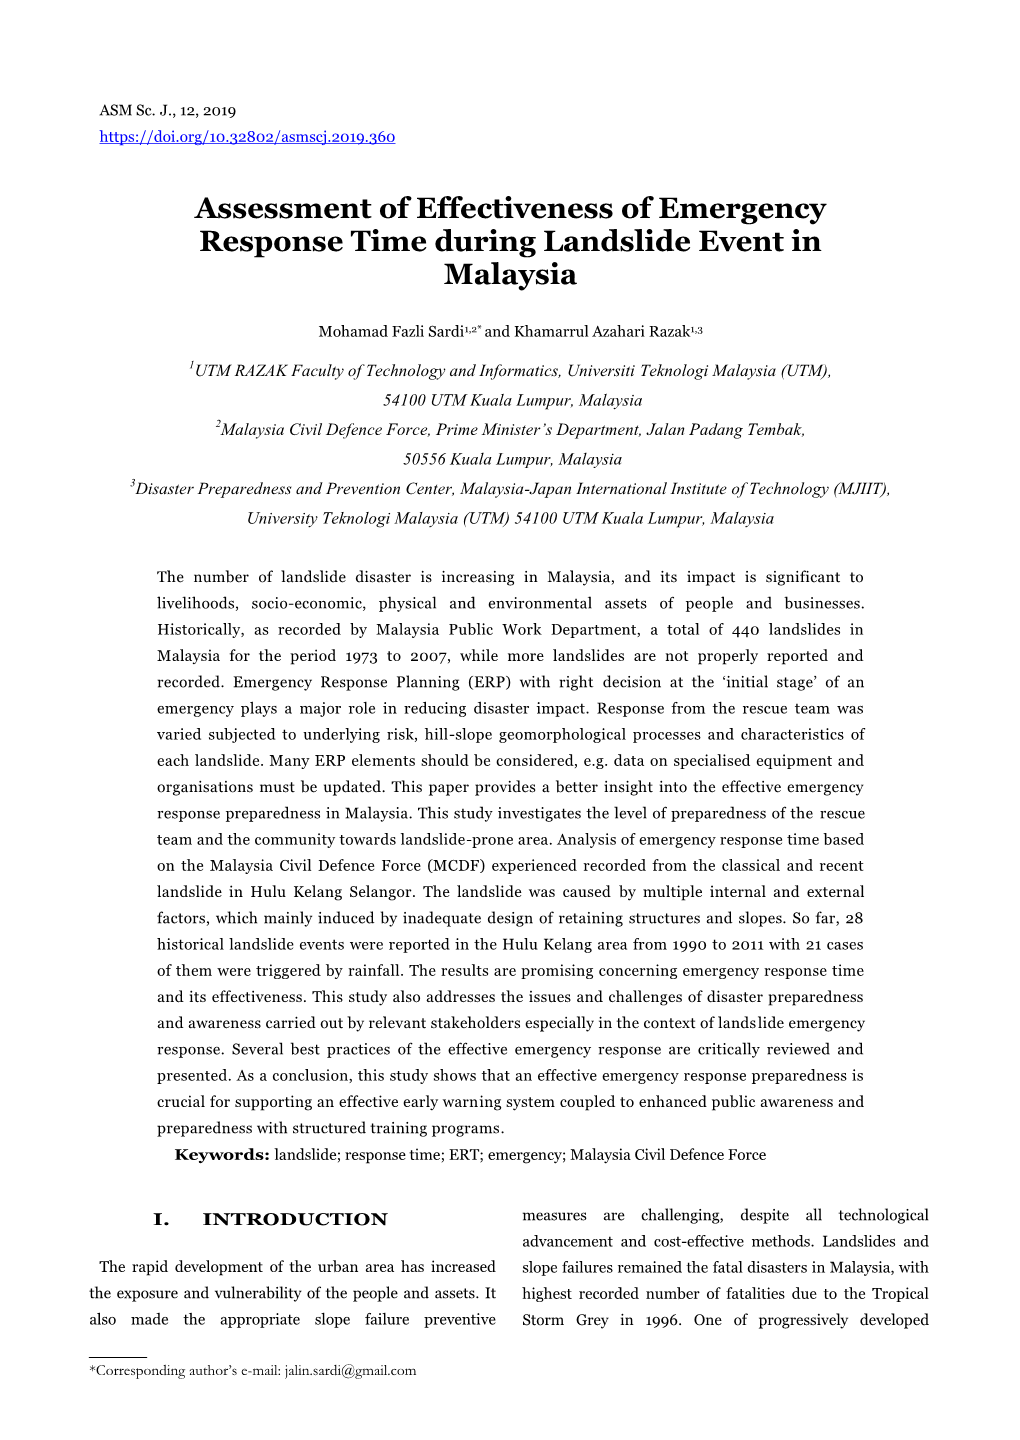 Assessment of Effectiveness of Emergency Response Time During Landslide Event in Malaysia